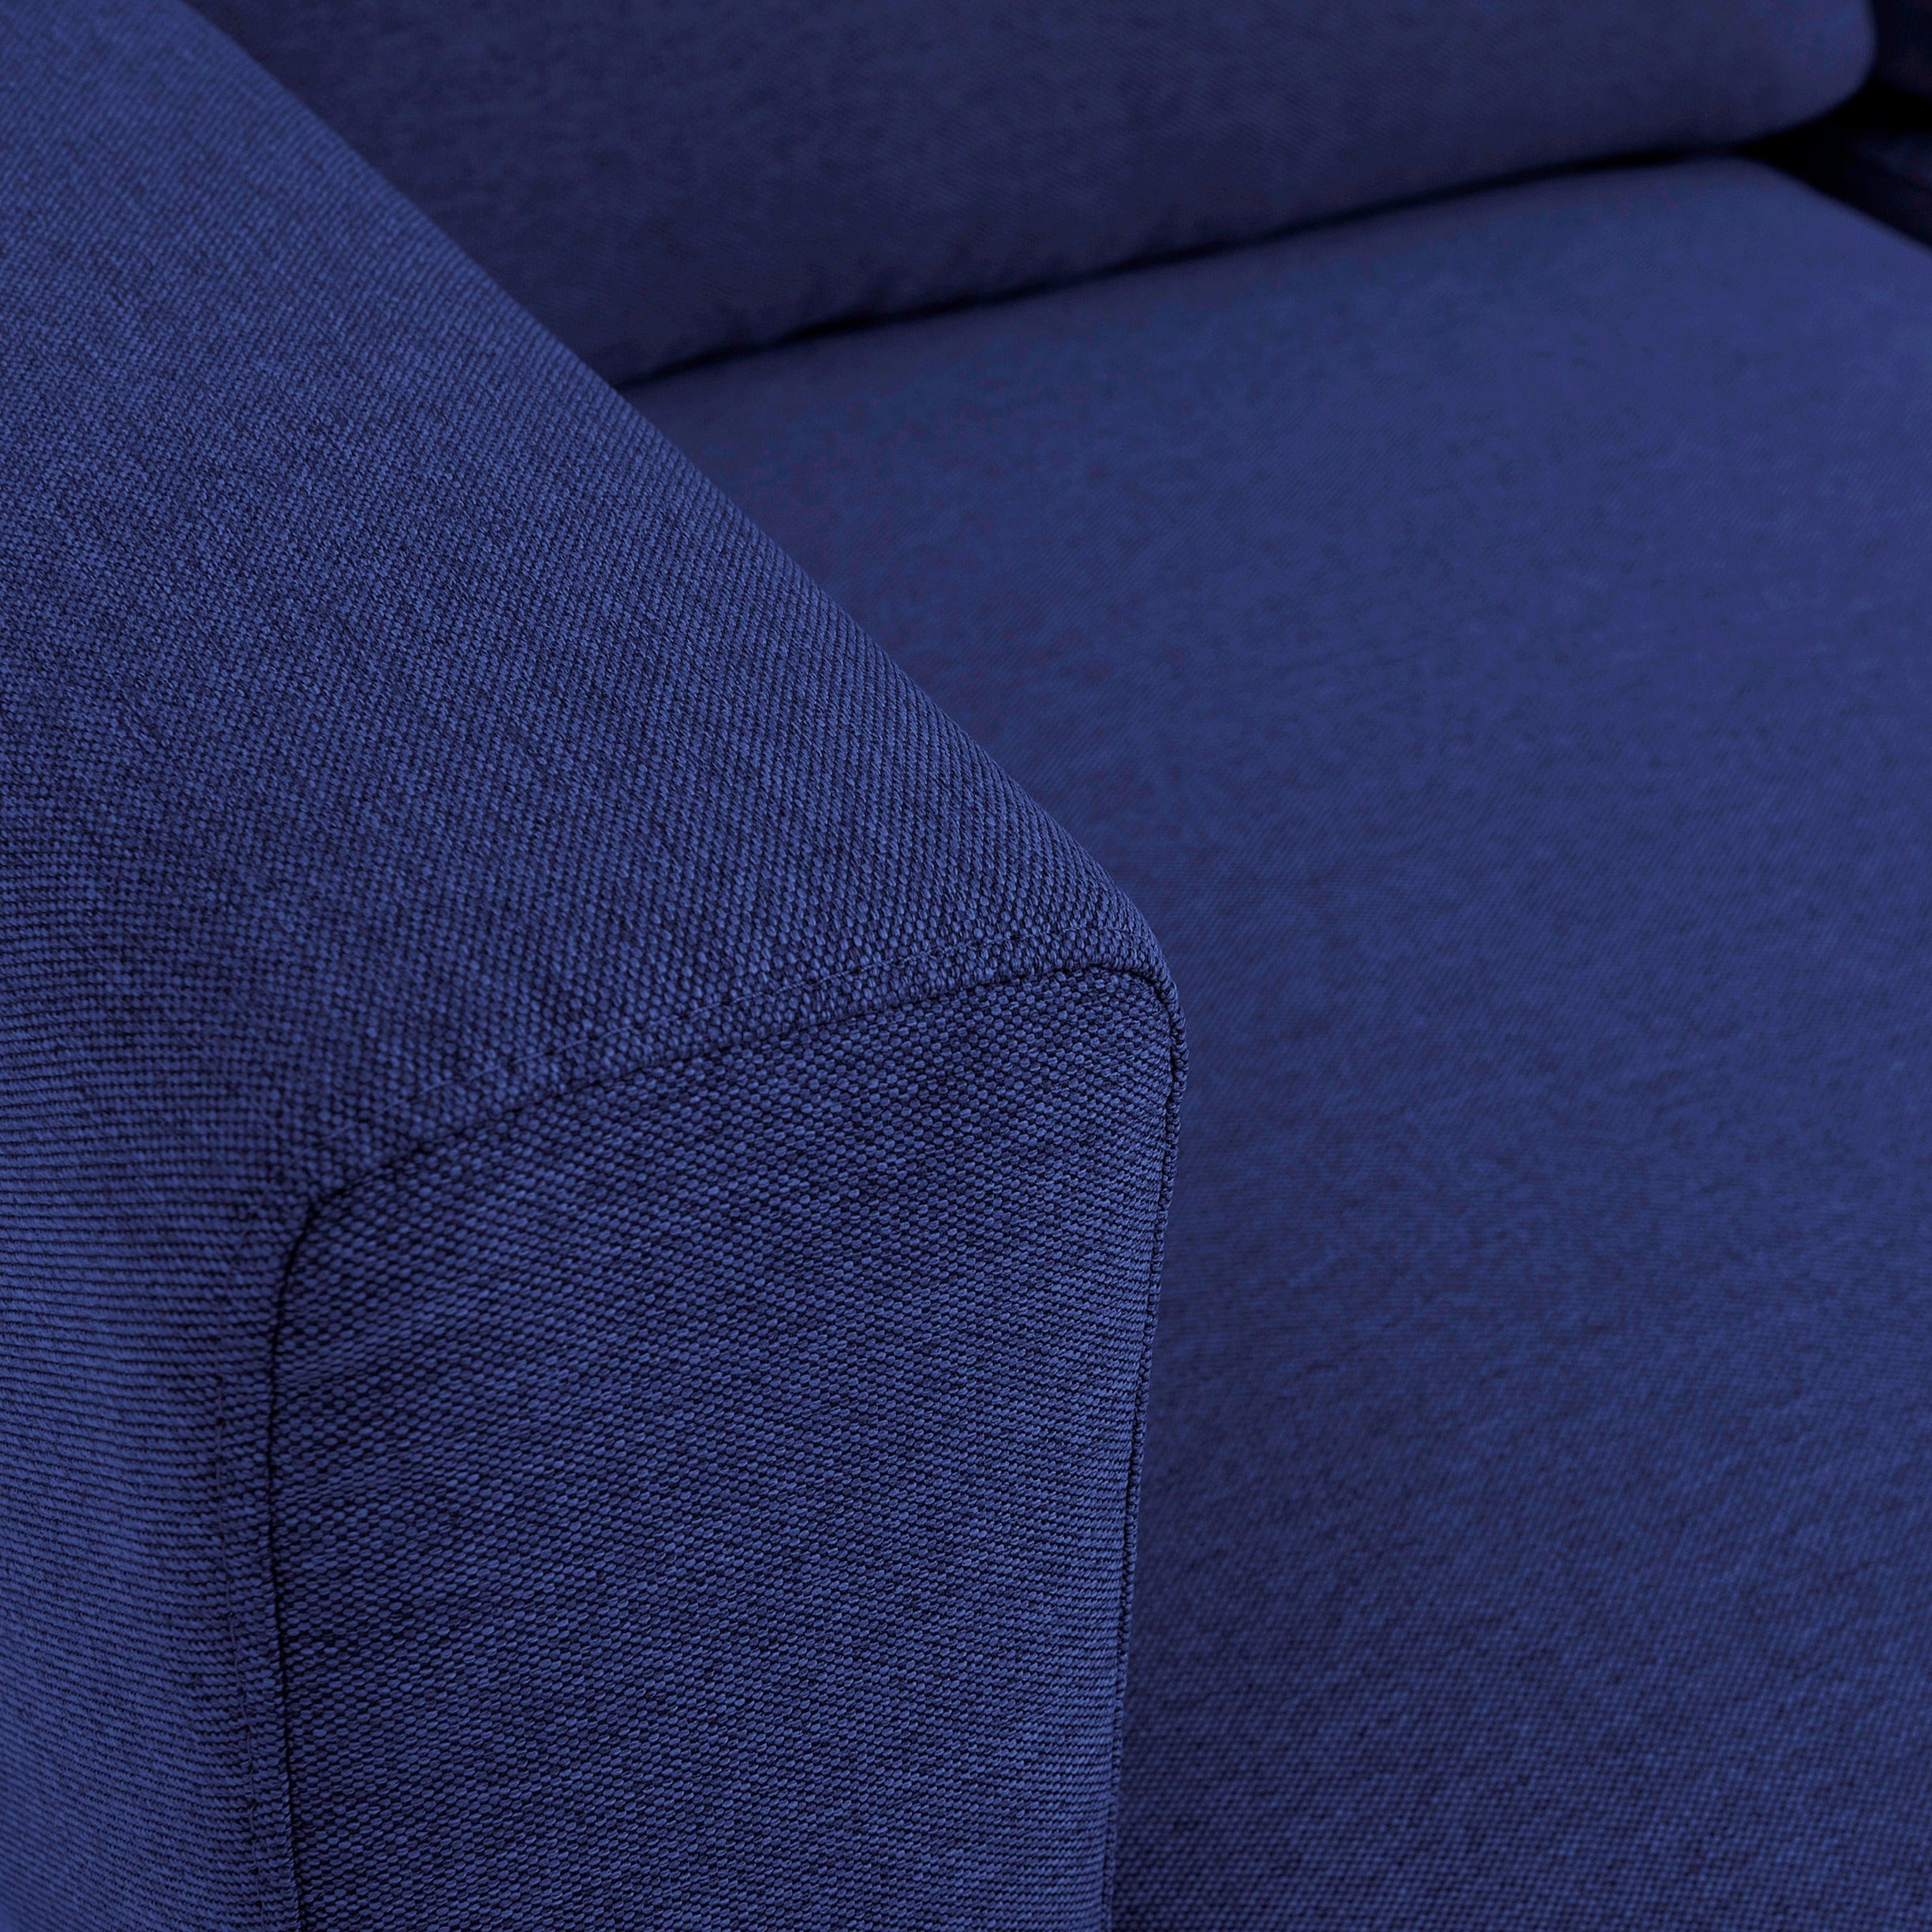 LOVER Sofa-blue upholstery-crop view